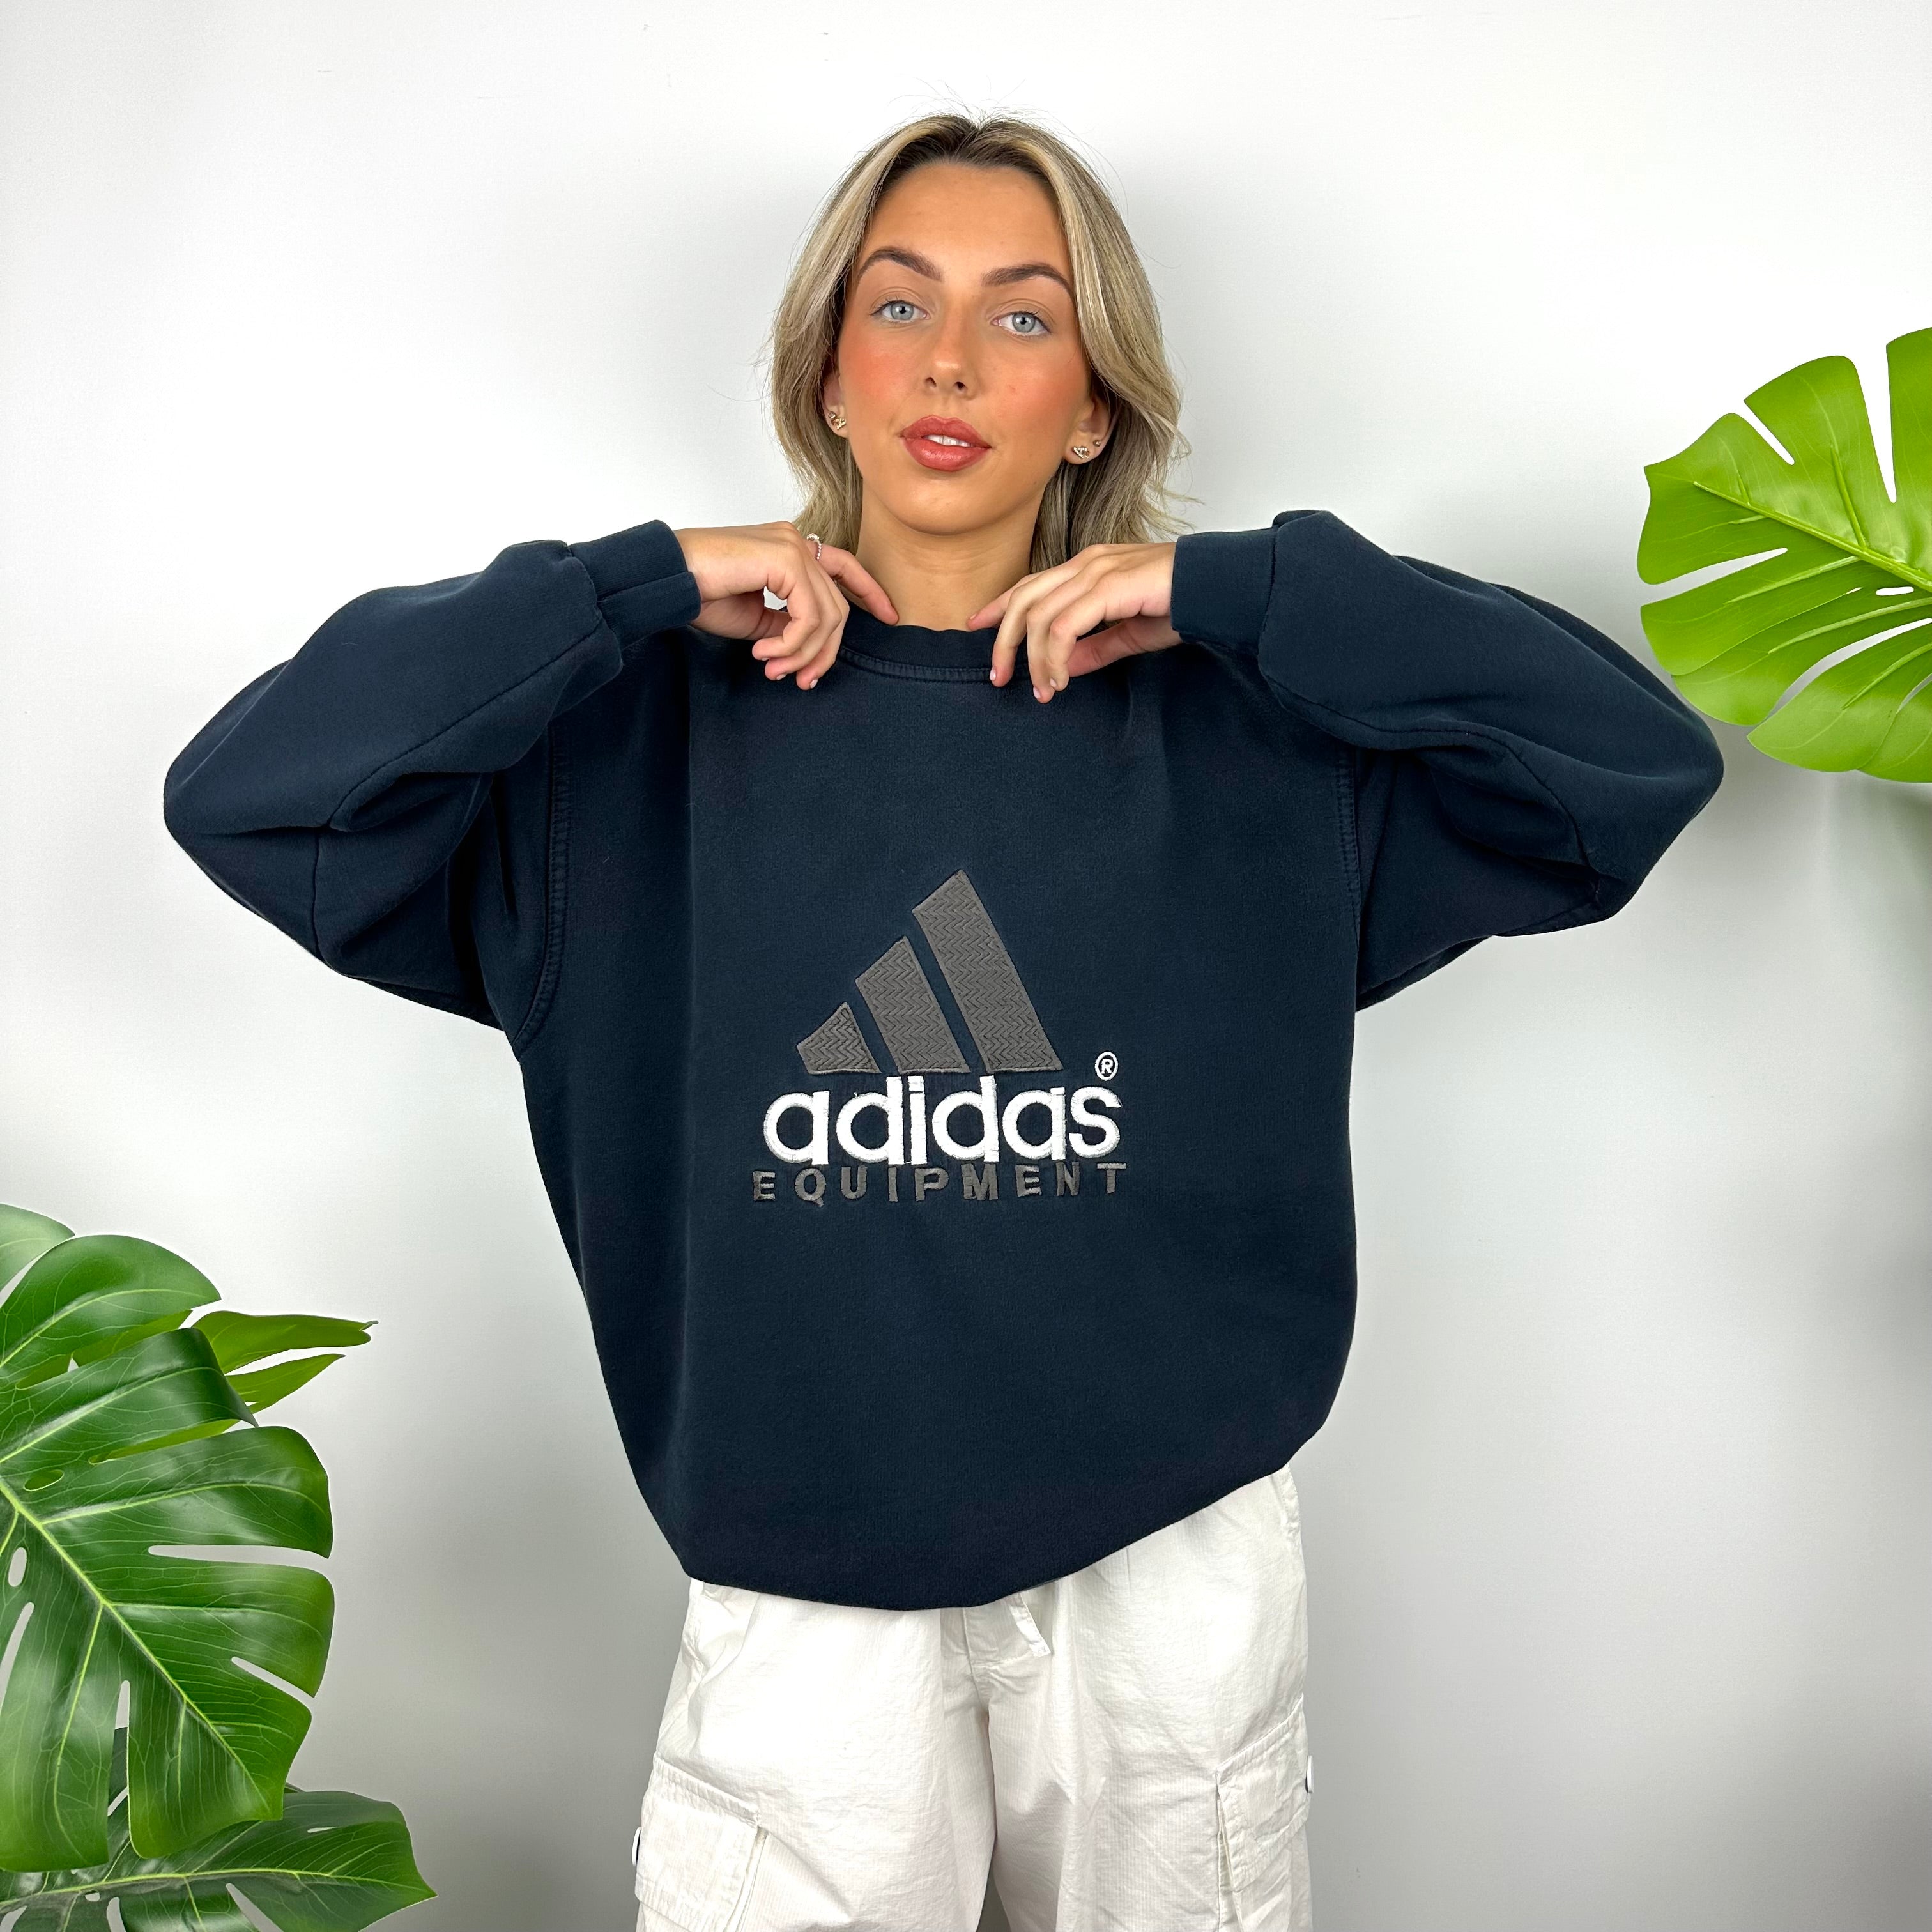 Adidas Equipment RARE Navy Embroidered Spell Out Sweatshirt (L)